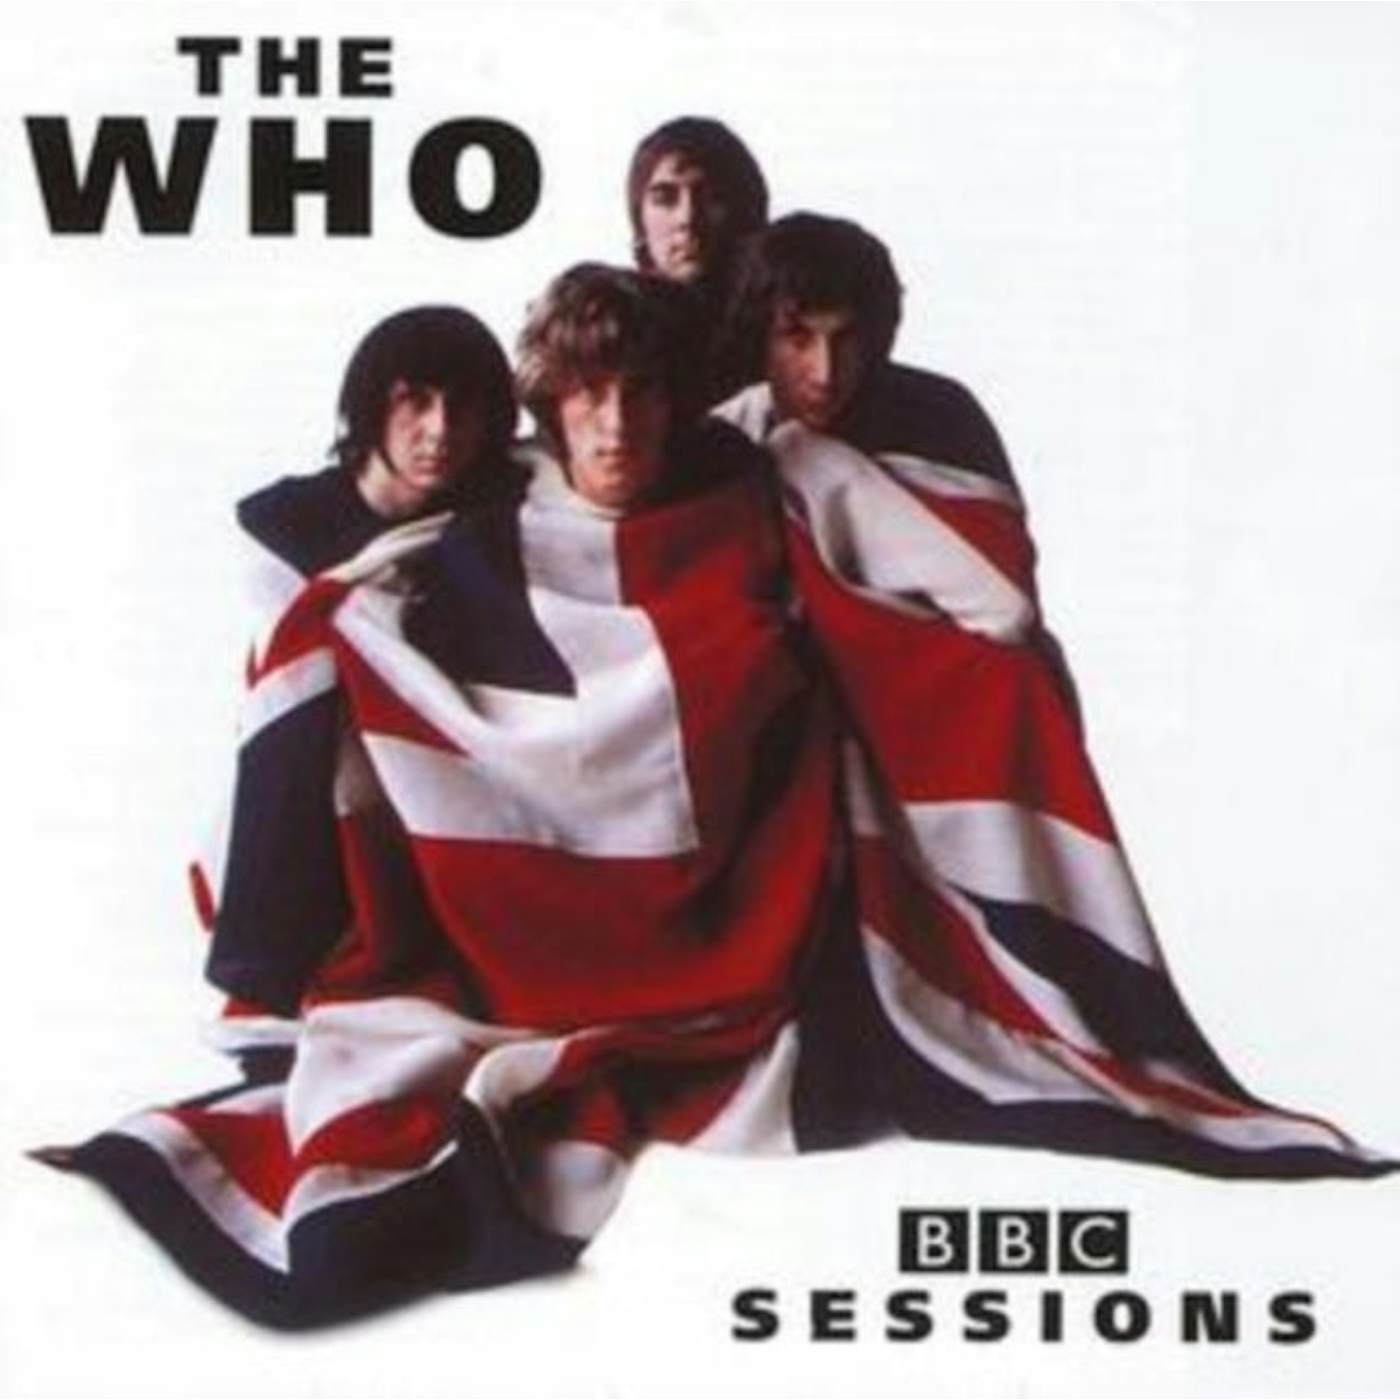 The Who LP Vinyl Record - The BBC Sessions